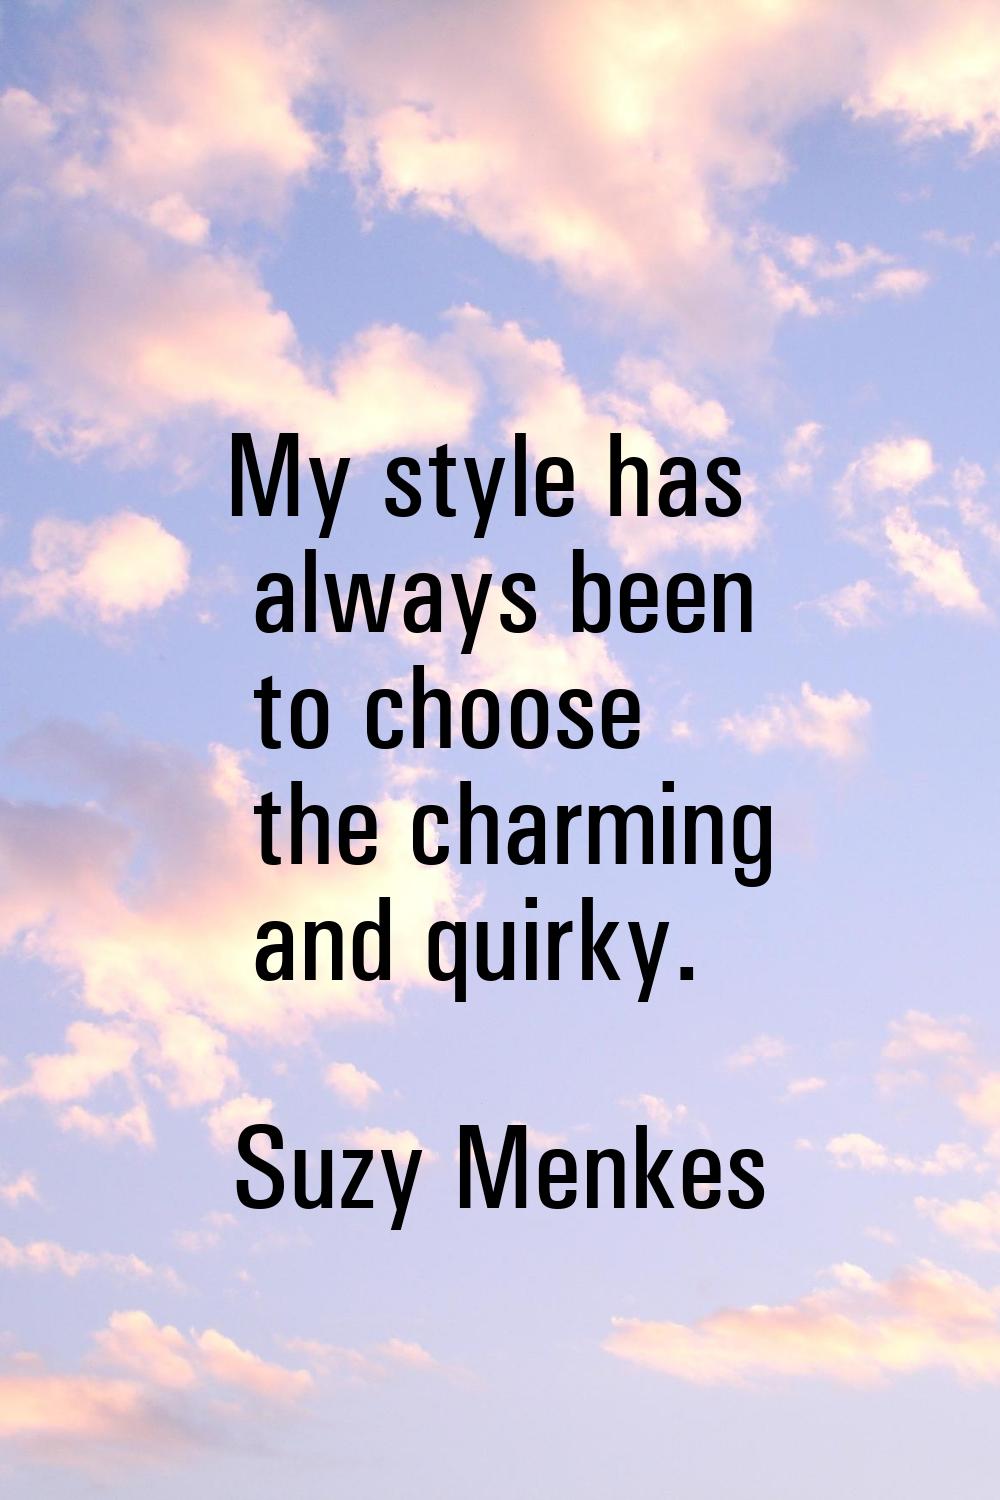 My style has always been to choose the charming and quirky.